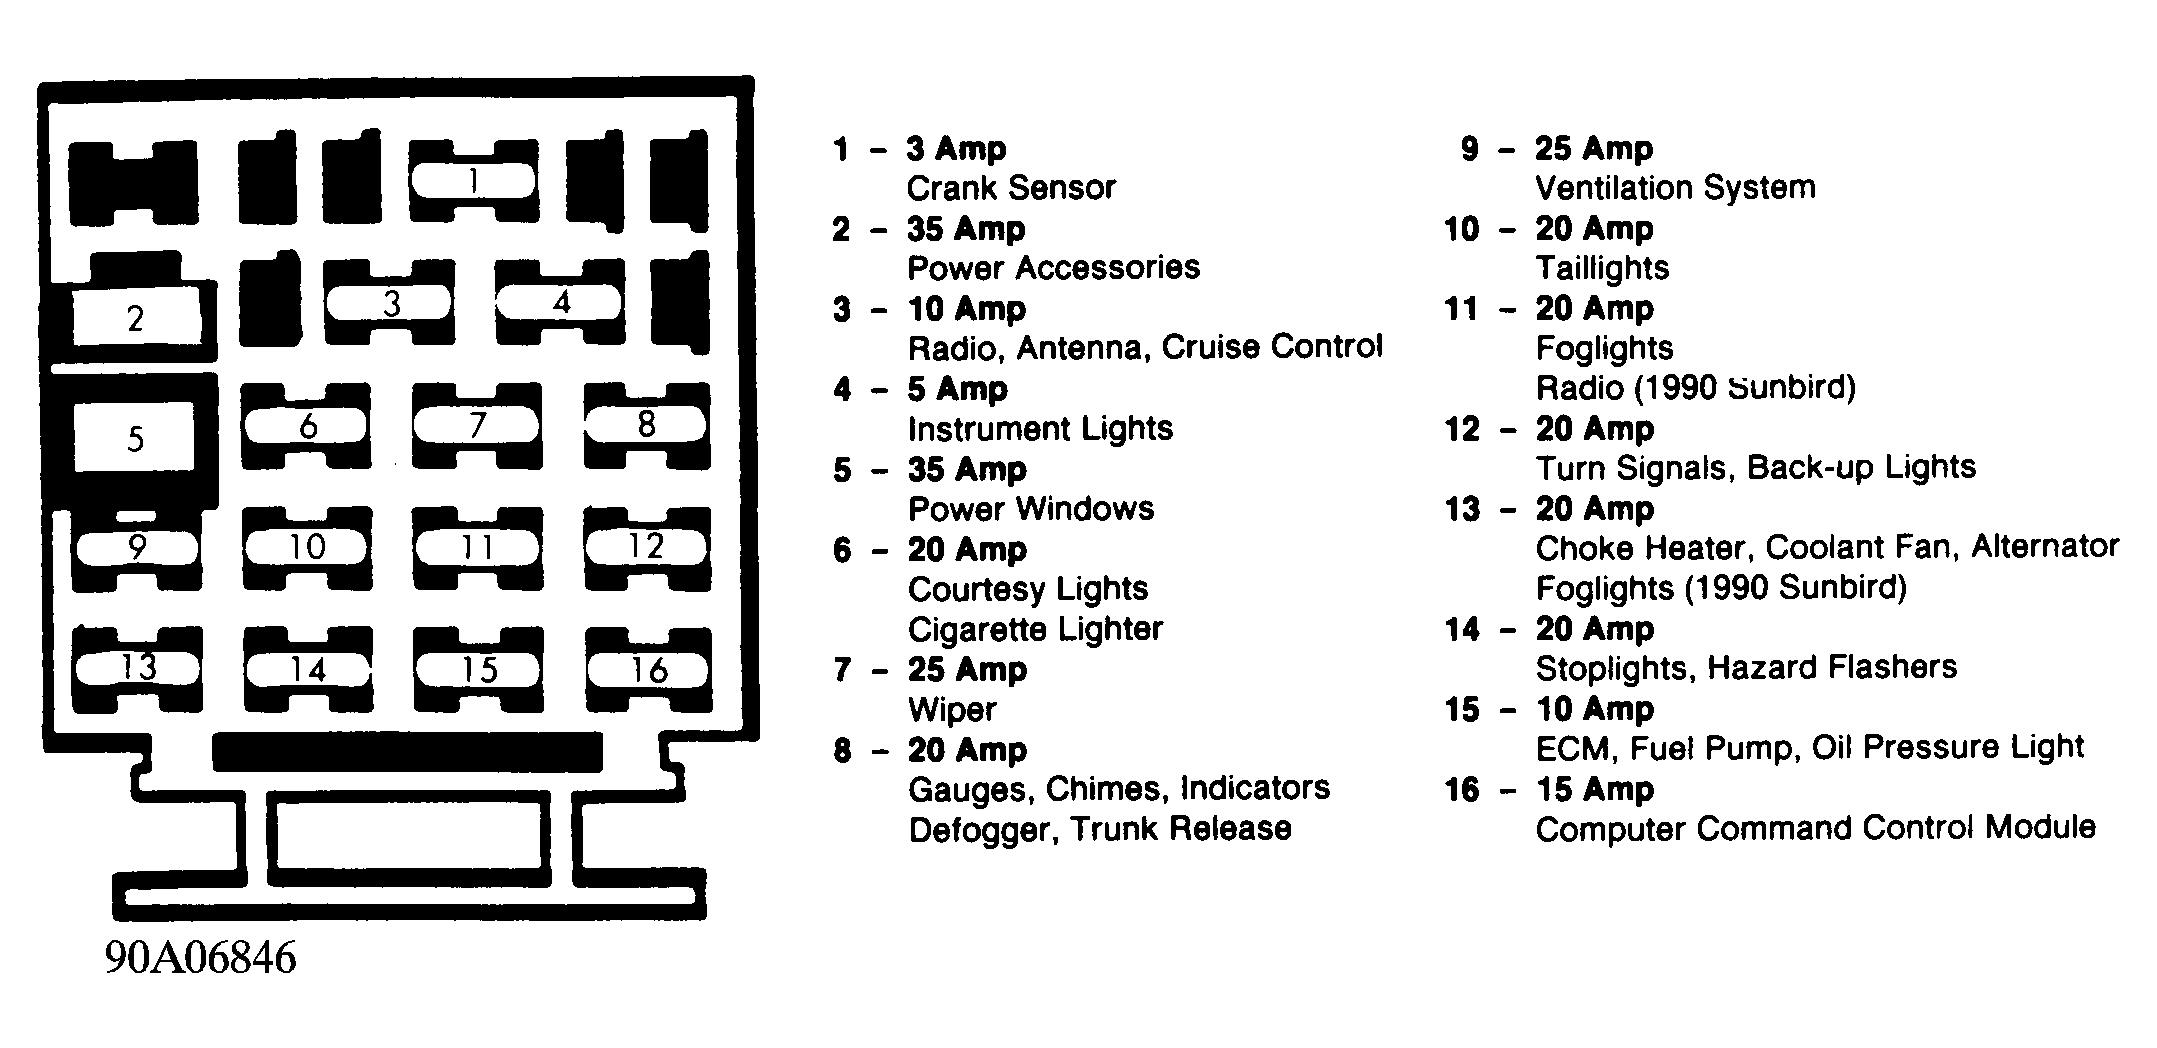 Chevrolet Cavalier RS 1994 - Component Locations -  Fuse Panel Identification (Typical 1983-90 Models)